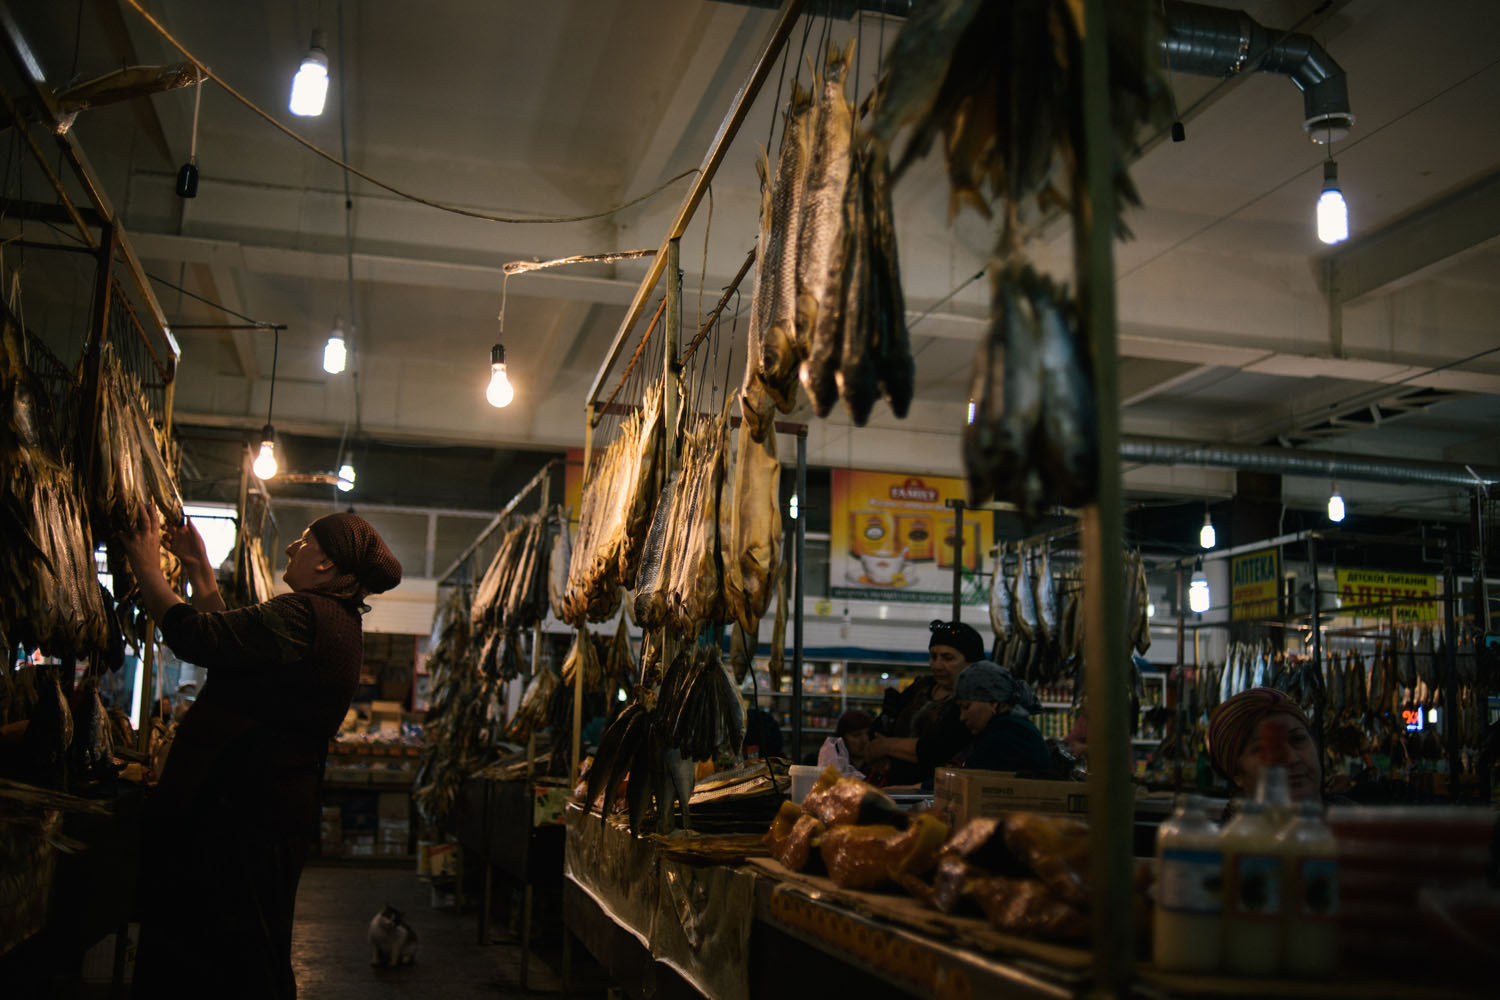 A woman watch the fish at the market in Makhachkala on May 14, 2013.